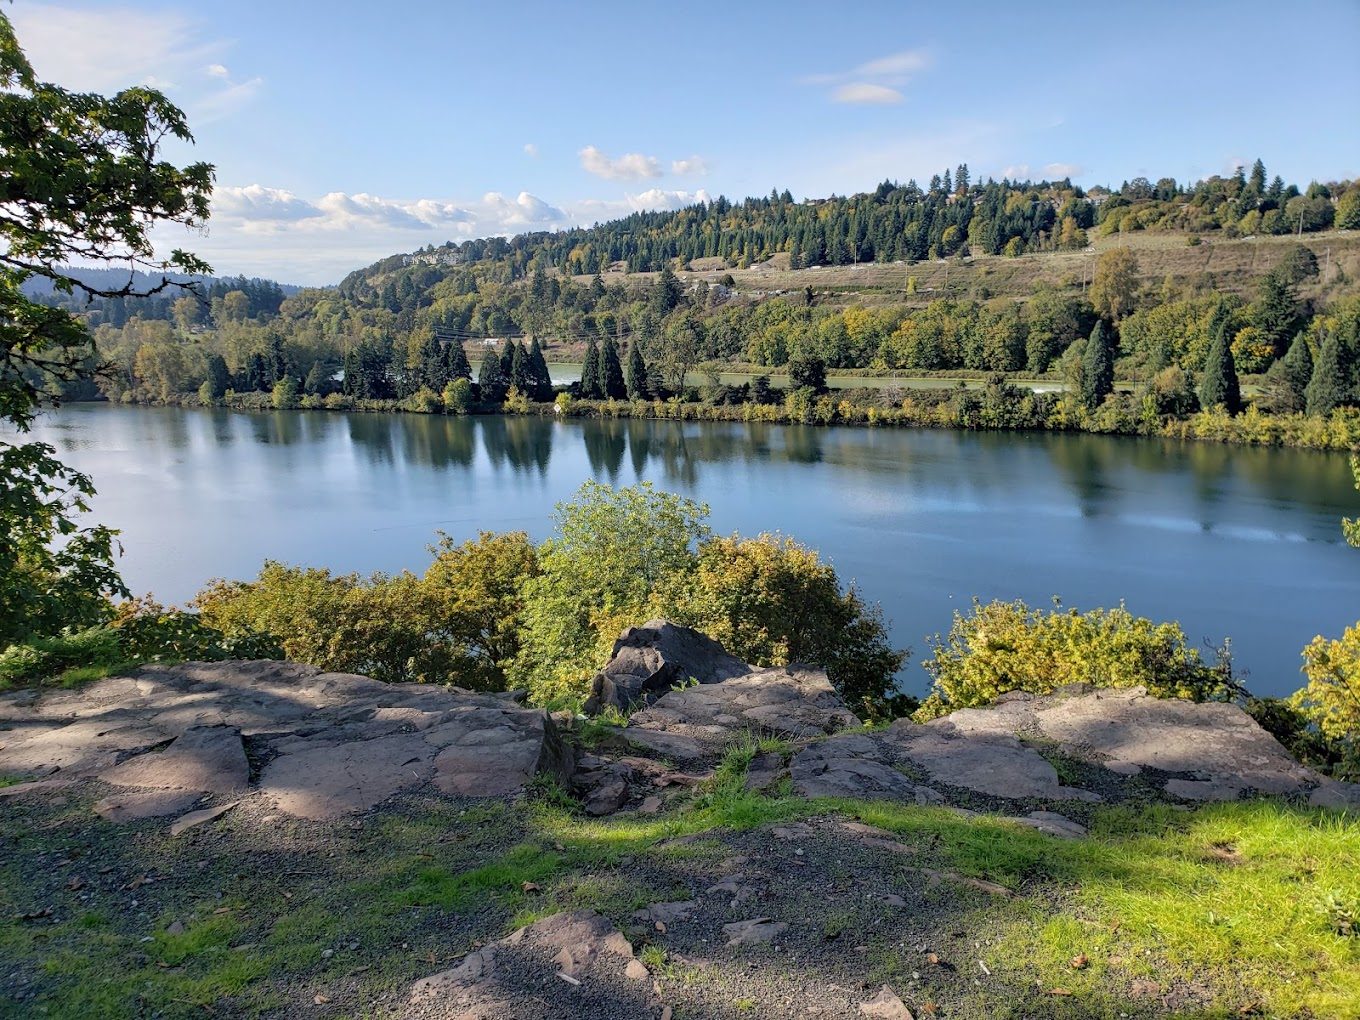 Immerse Yourself in Nature and Learn About Oregon History at this Extraordinary Park and Hiking Area